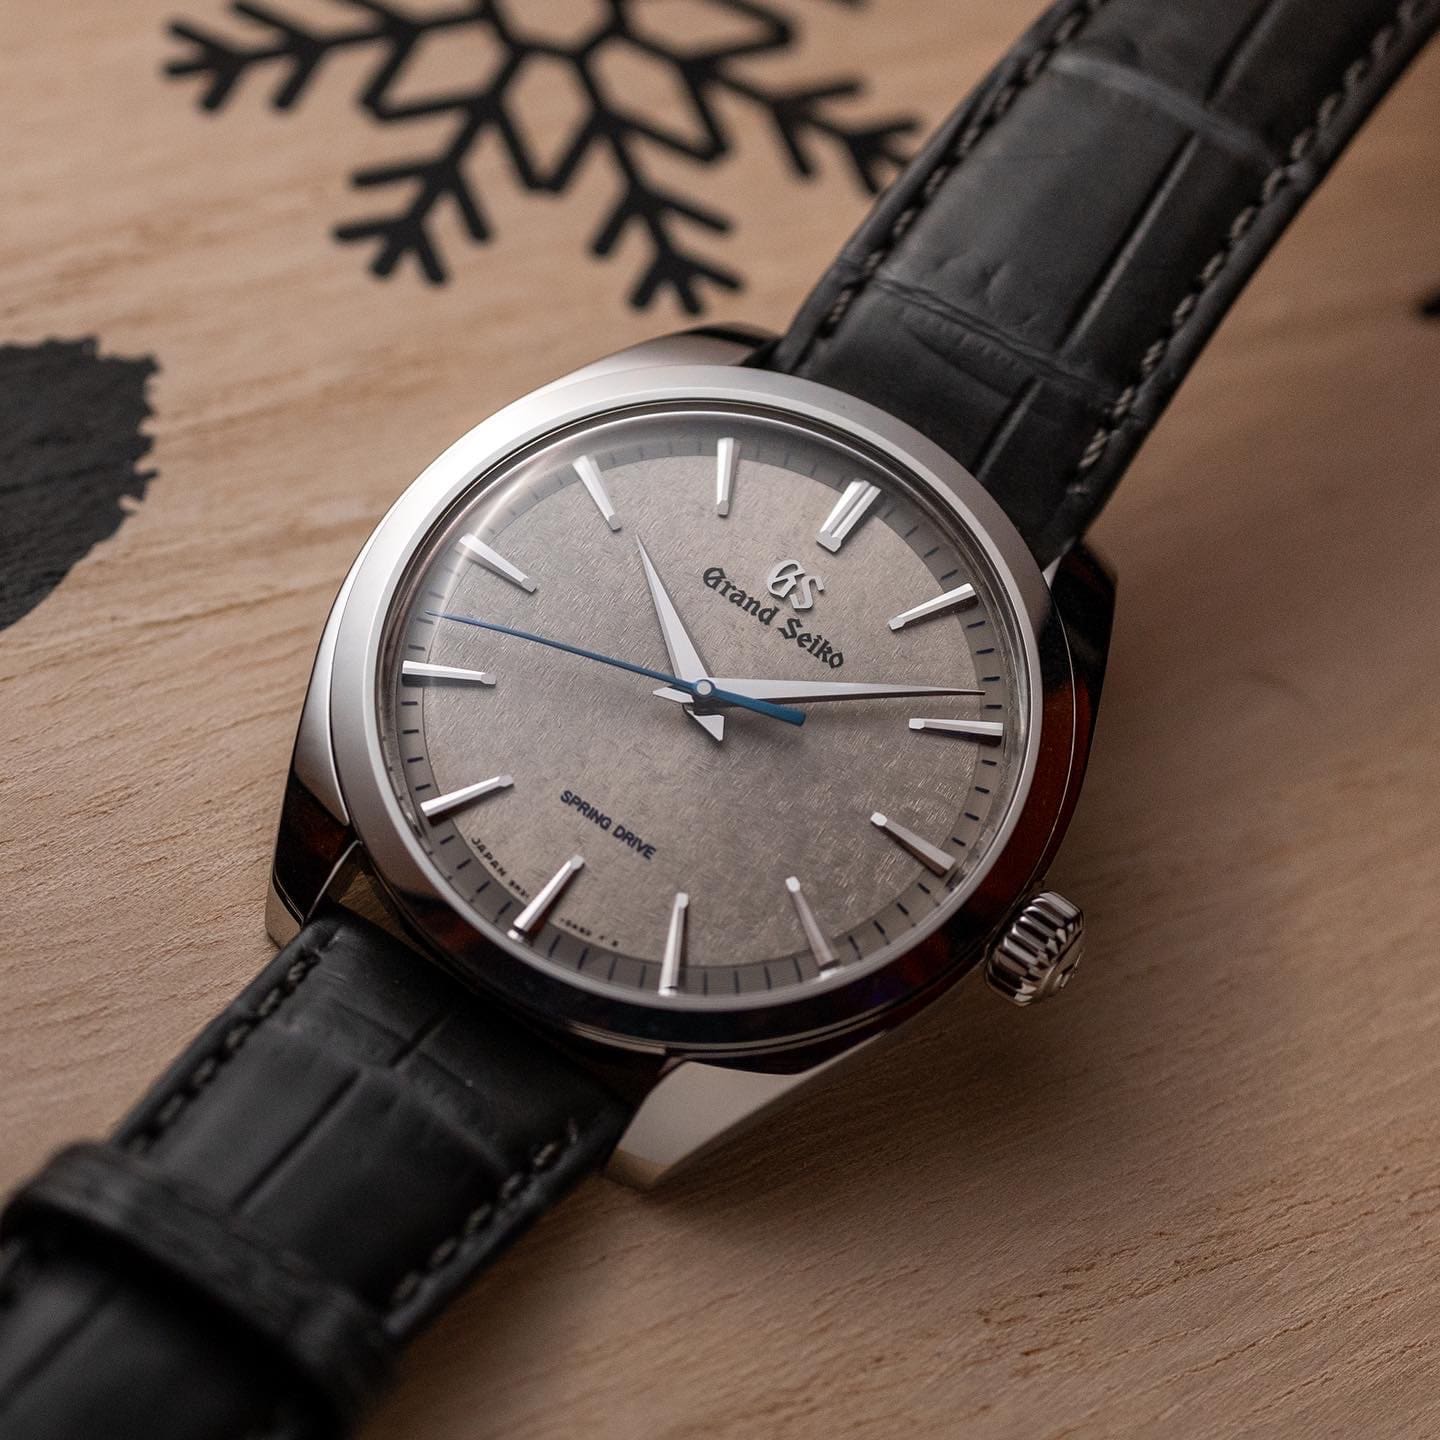 HANDS-ON: Grand Seiko SBGY023 GS9 Club USA Limited Edition